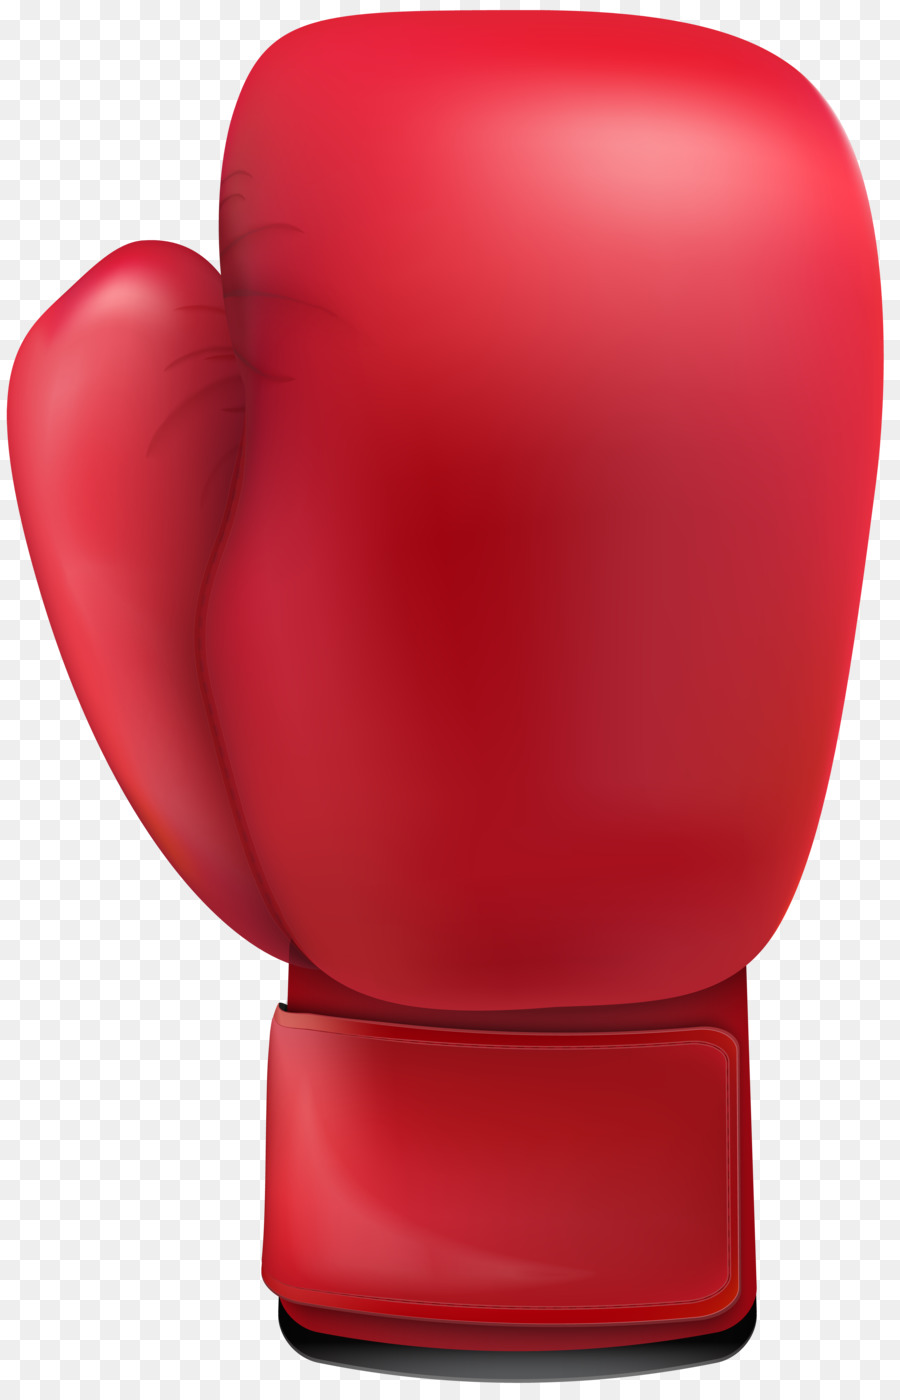 Boxing glove Clip art - boxing gloves png download - 5168*8000 - Free Transparent Boxing Glove png Download.